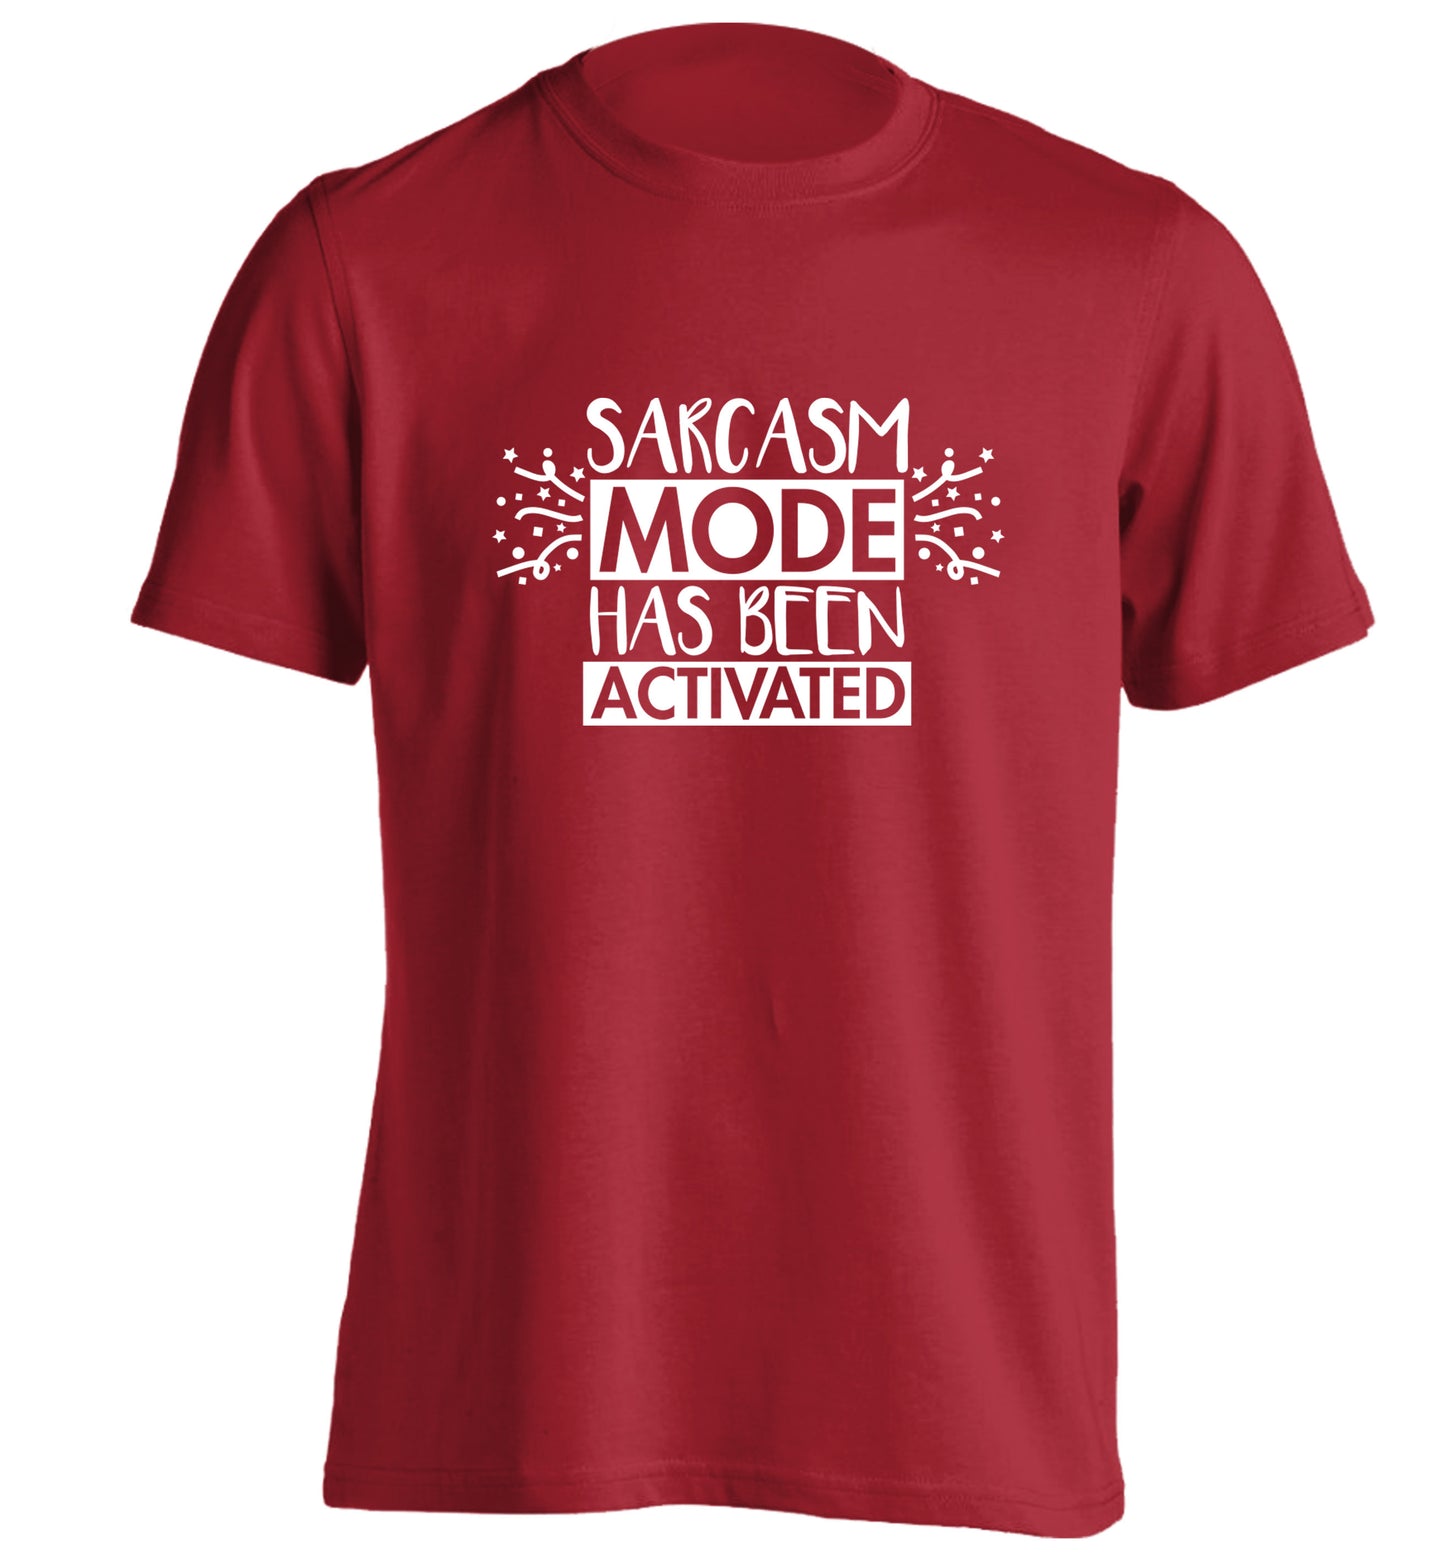 Sarcarsm mode has been activated adults unisex red Tshirt 2XL